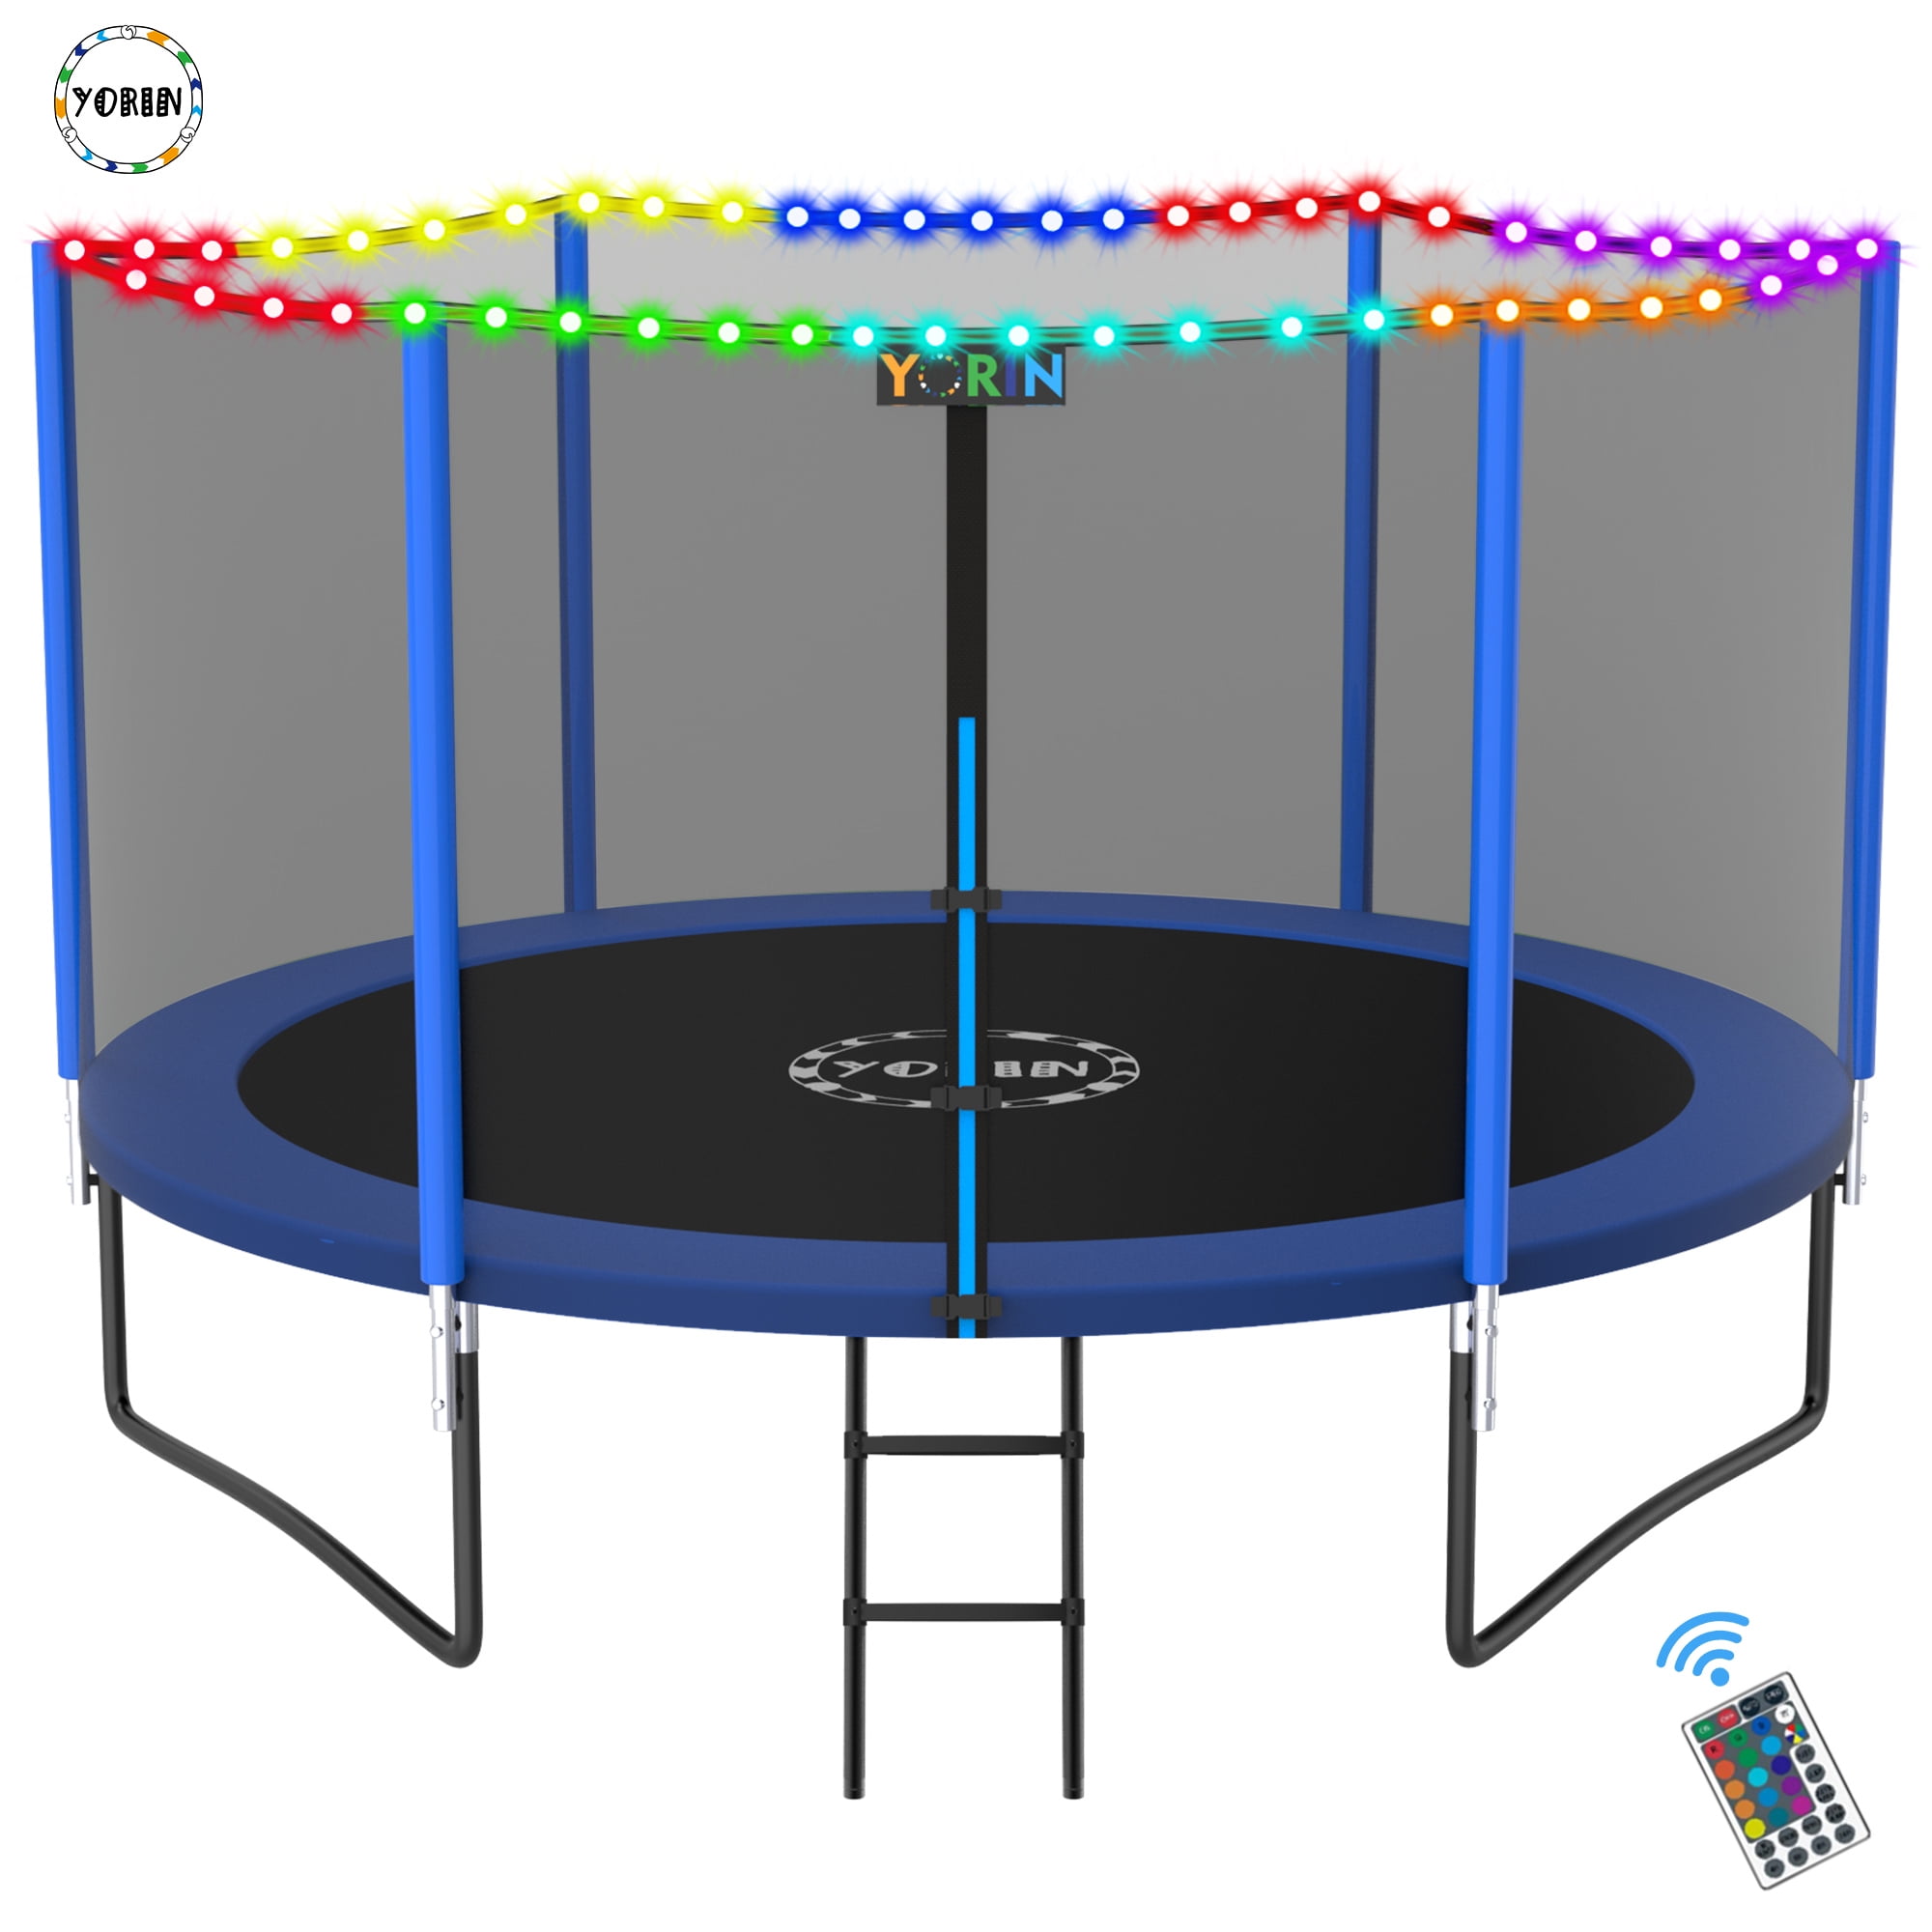 YORIN Trampoline for 2-3 Kids, 8 FT Trampoline for Adults with Enclosure Net, Ladder, Light, 800LBS Weight Capacity Outdoor Round Recreational Trampoline, Heavy Duty Trampoline - image 1 of 8